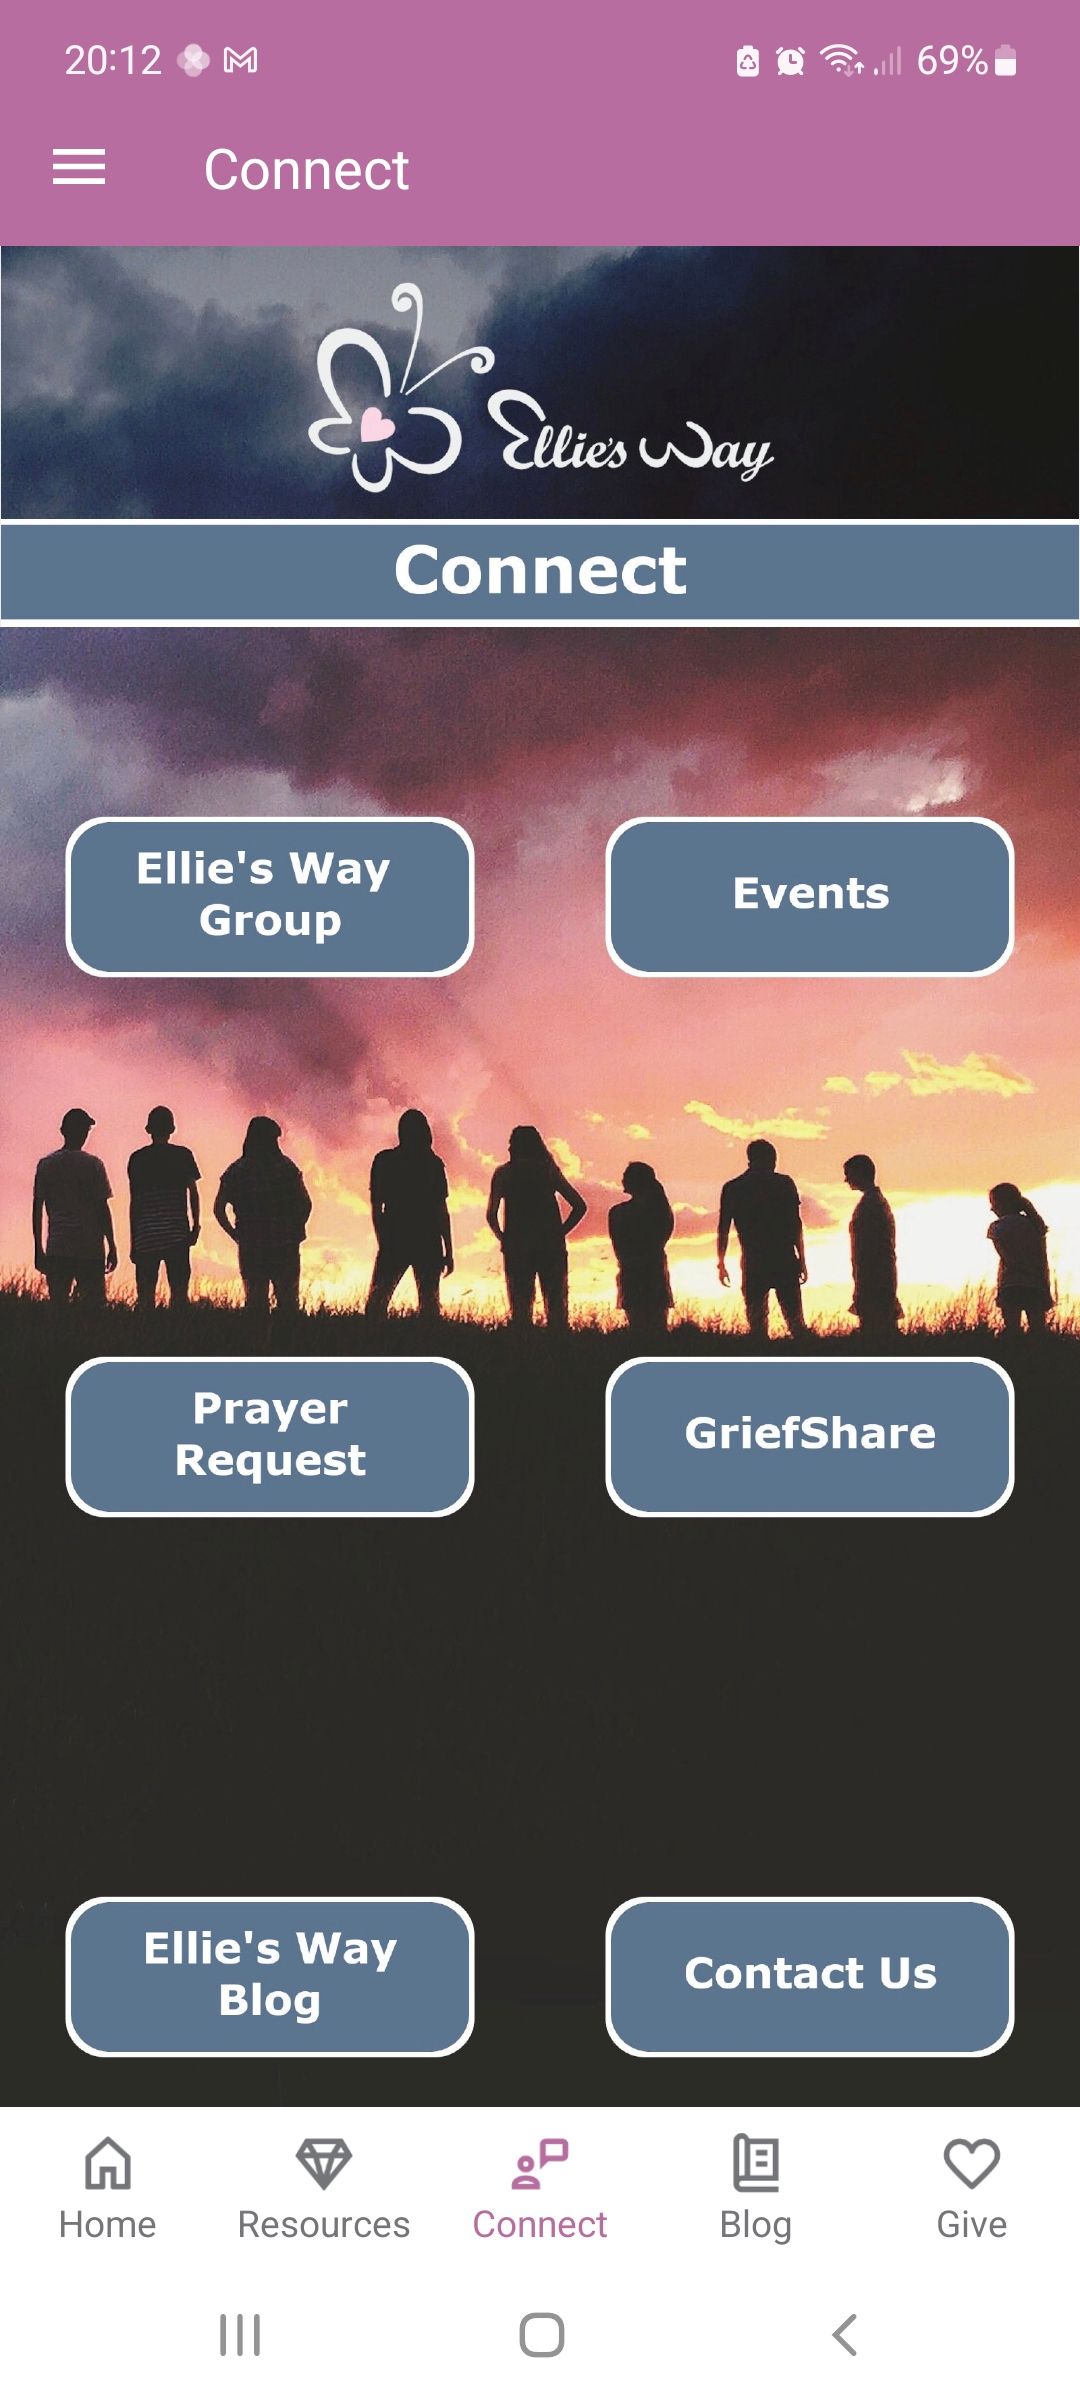 Ellies Way grieving app connect